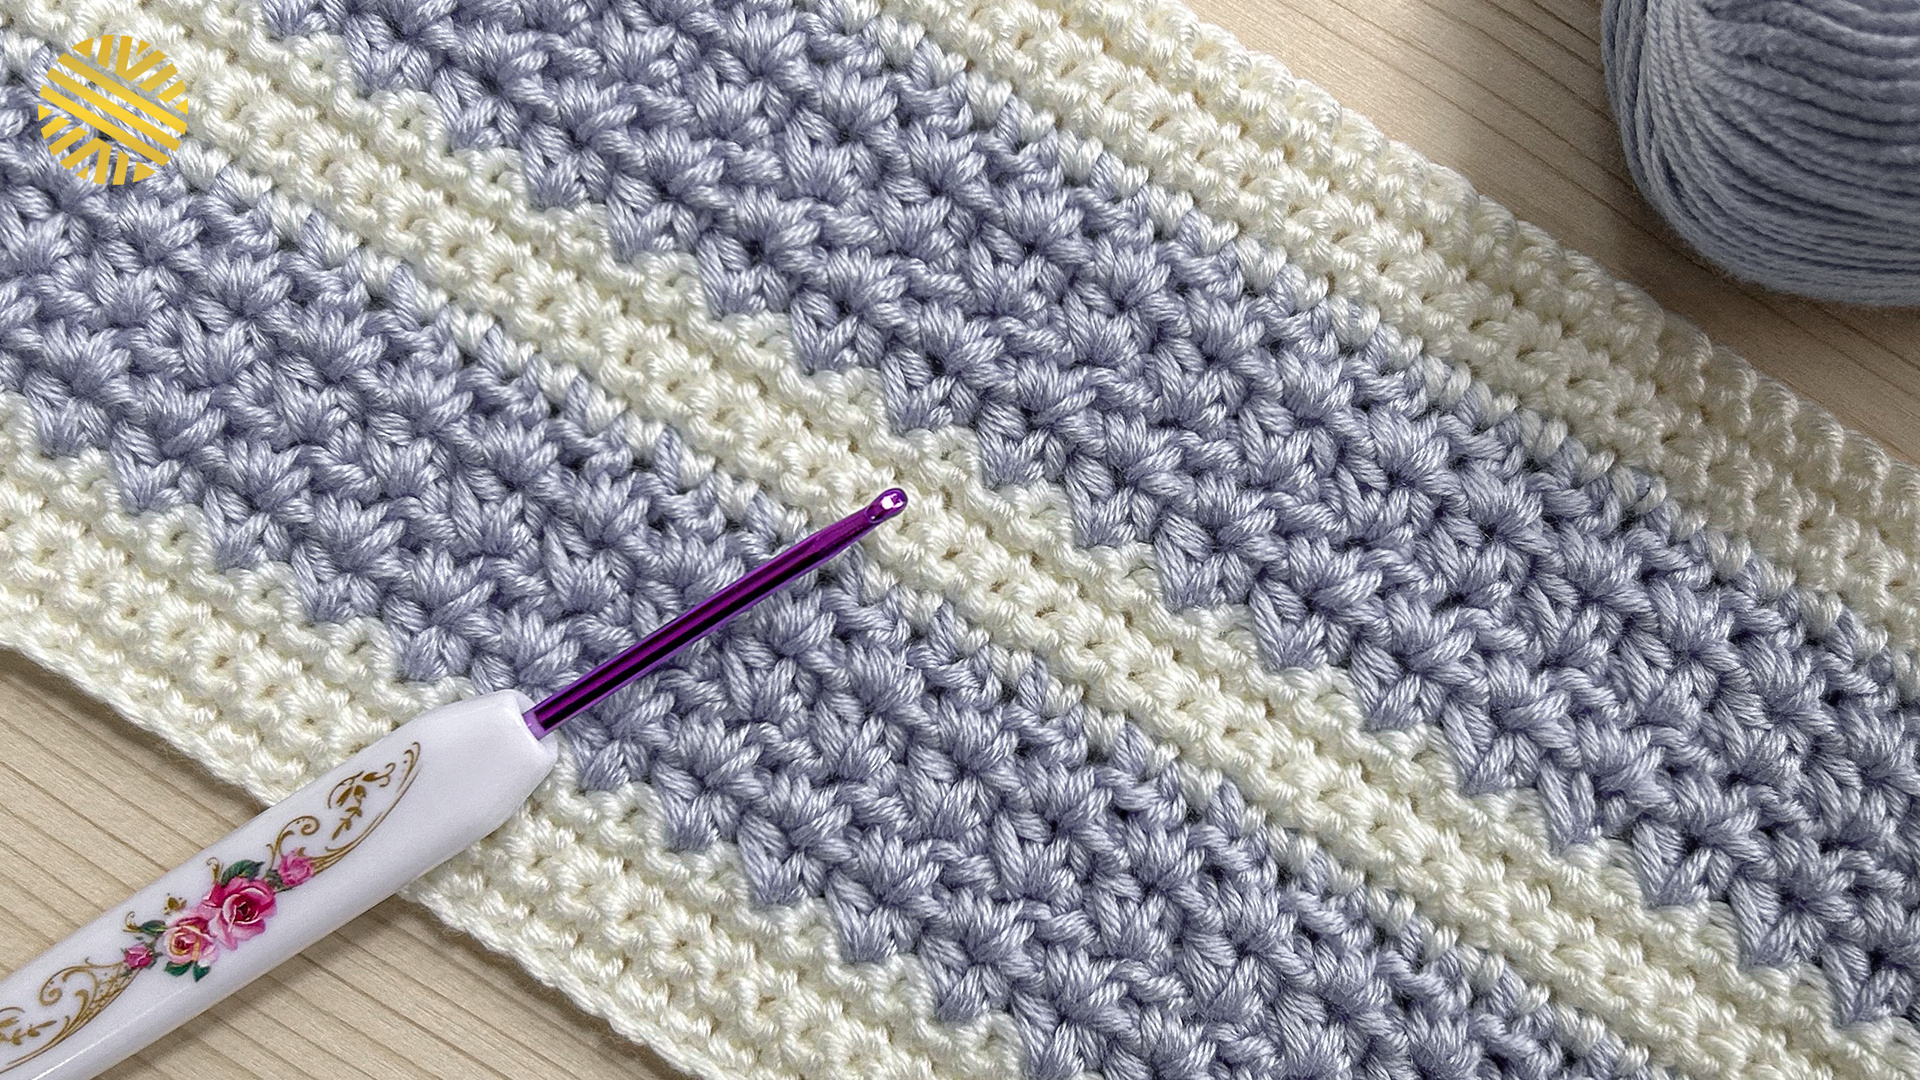 How to Learn Basic Crochet Stitches step by step for Absolute